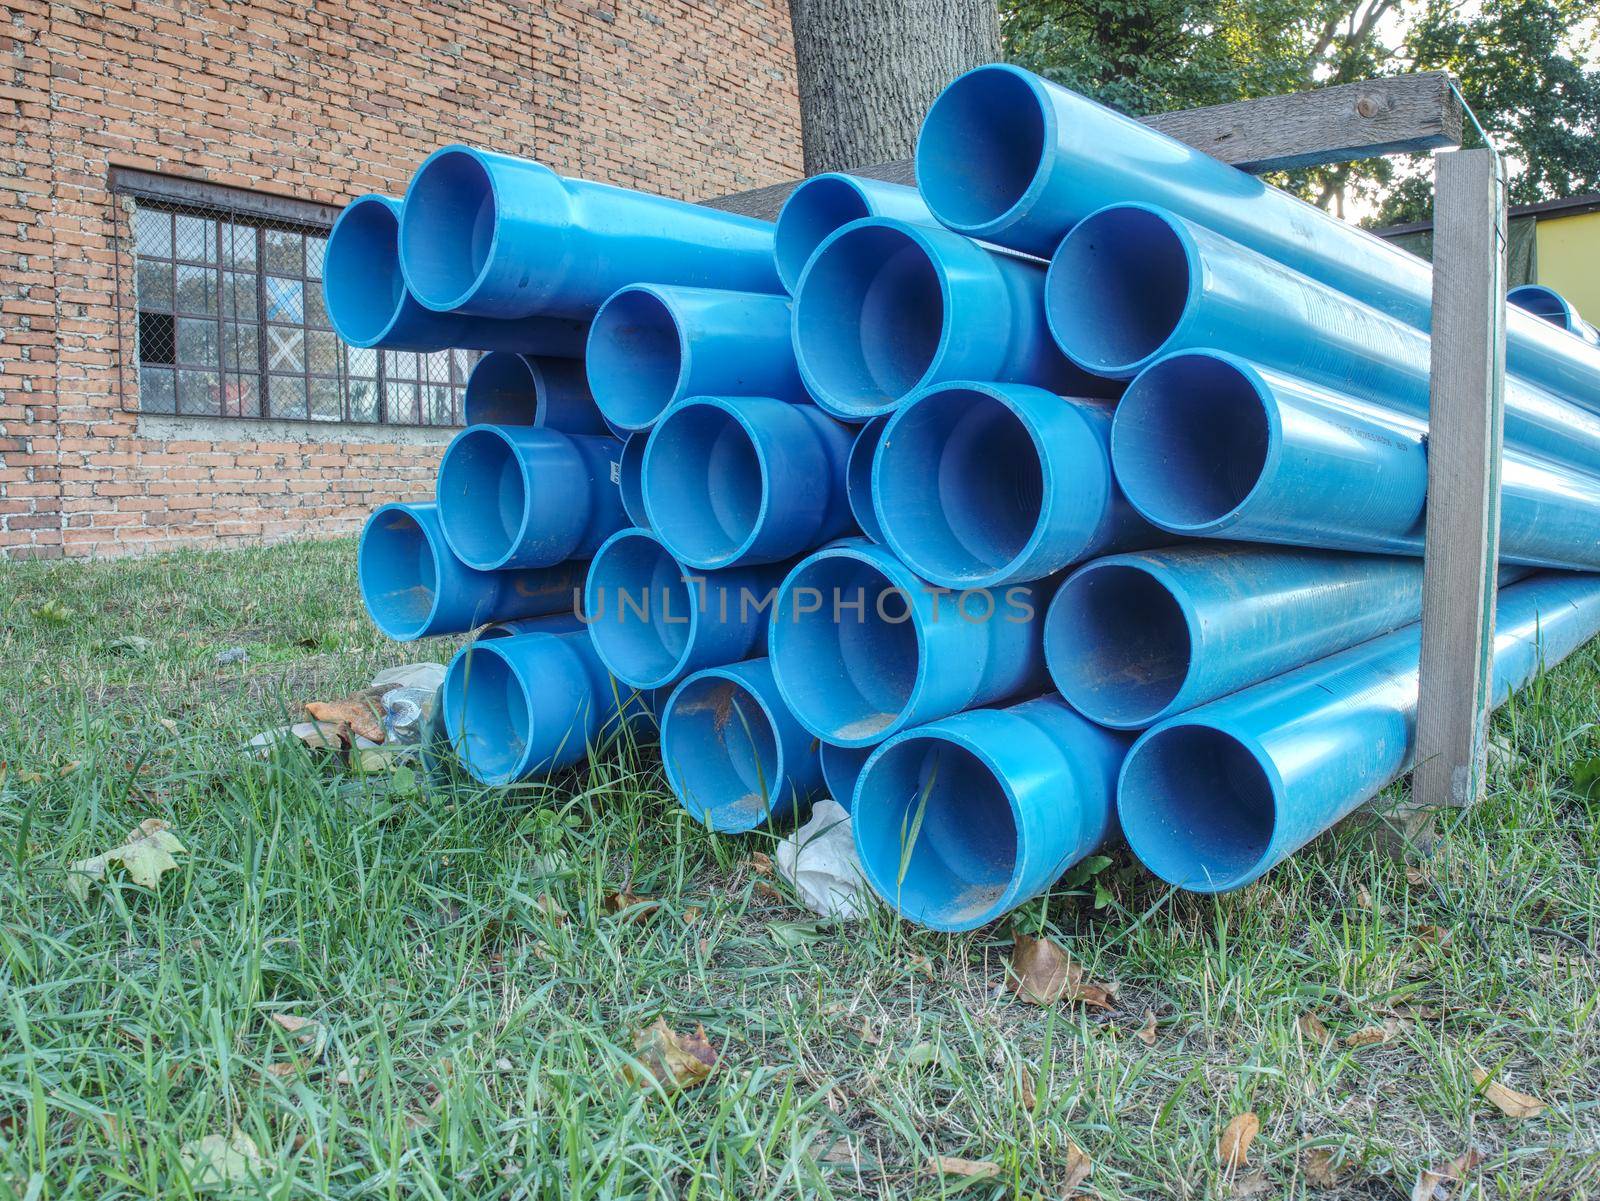 Bundles of blue plastic pipes for water transport. Pipe batch construction site.